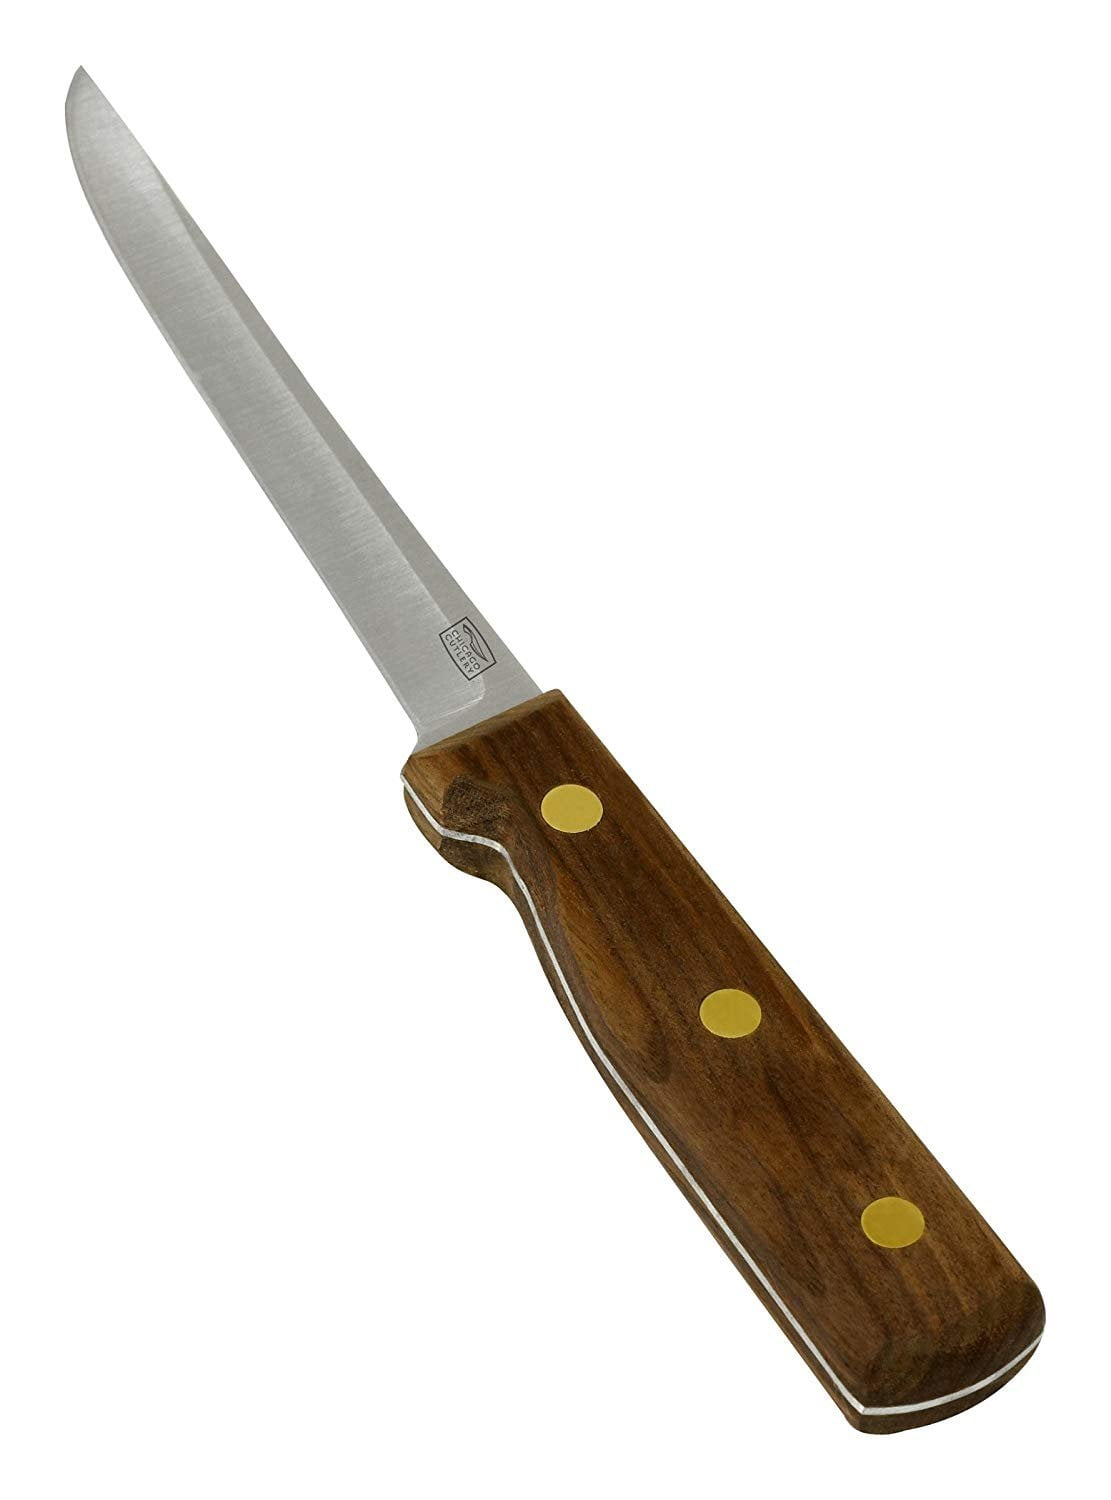 Chicago Cutlery 3.5 Paring Knife 5H12J Stainless Blade